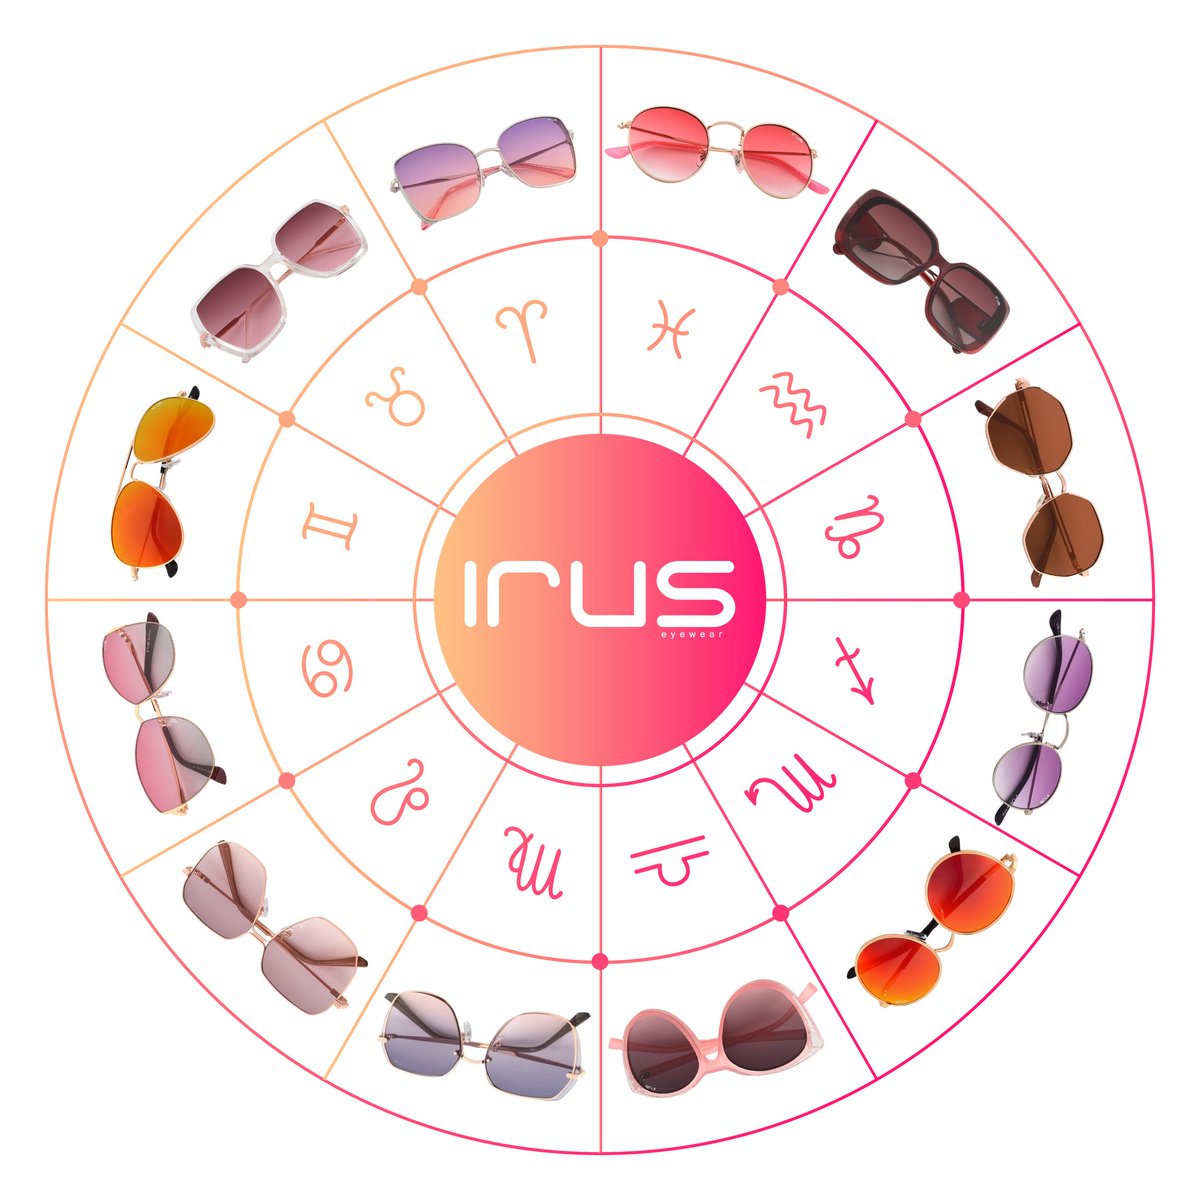 A spectrum of style: Discover our colourful eyewear for every zodiac sign! #KaleidoscopeCollection 

#IRUSeyewear #Sunglasses #Specs #ColorfulSpecs #SummerColours #SummerStyles #TrendyStyles #StyleInspo #FashionInspo #Fashion #Style #NewCollection